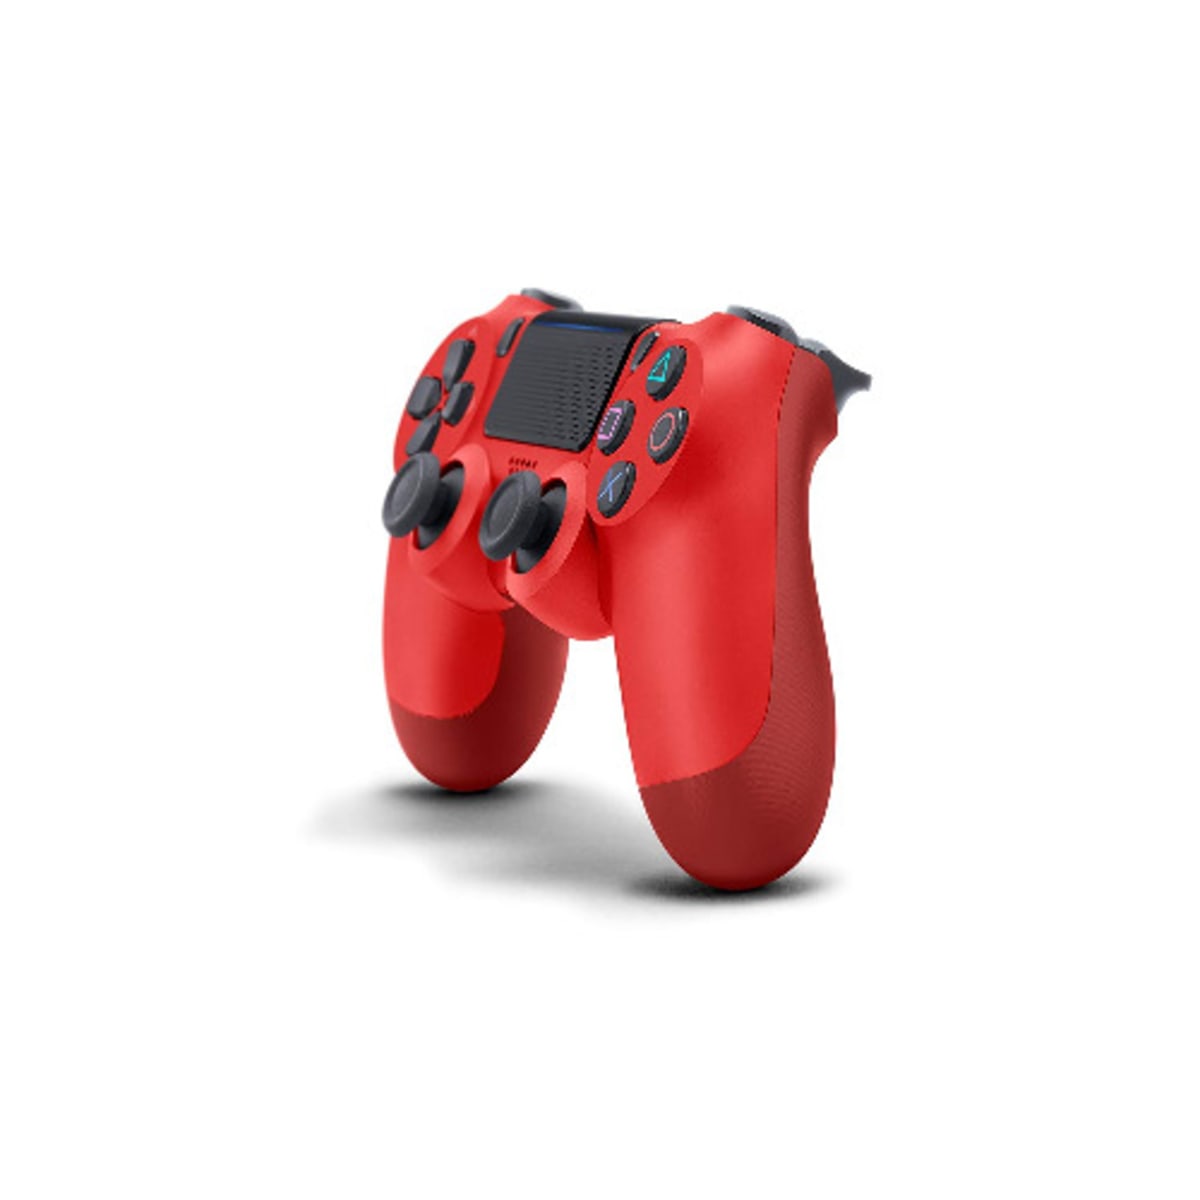 Sony DualShock 4 Wireless Controller for PlayStation 4 - Magma Red